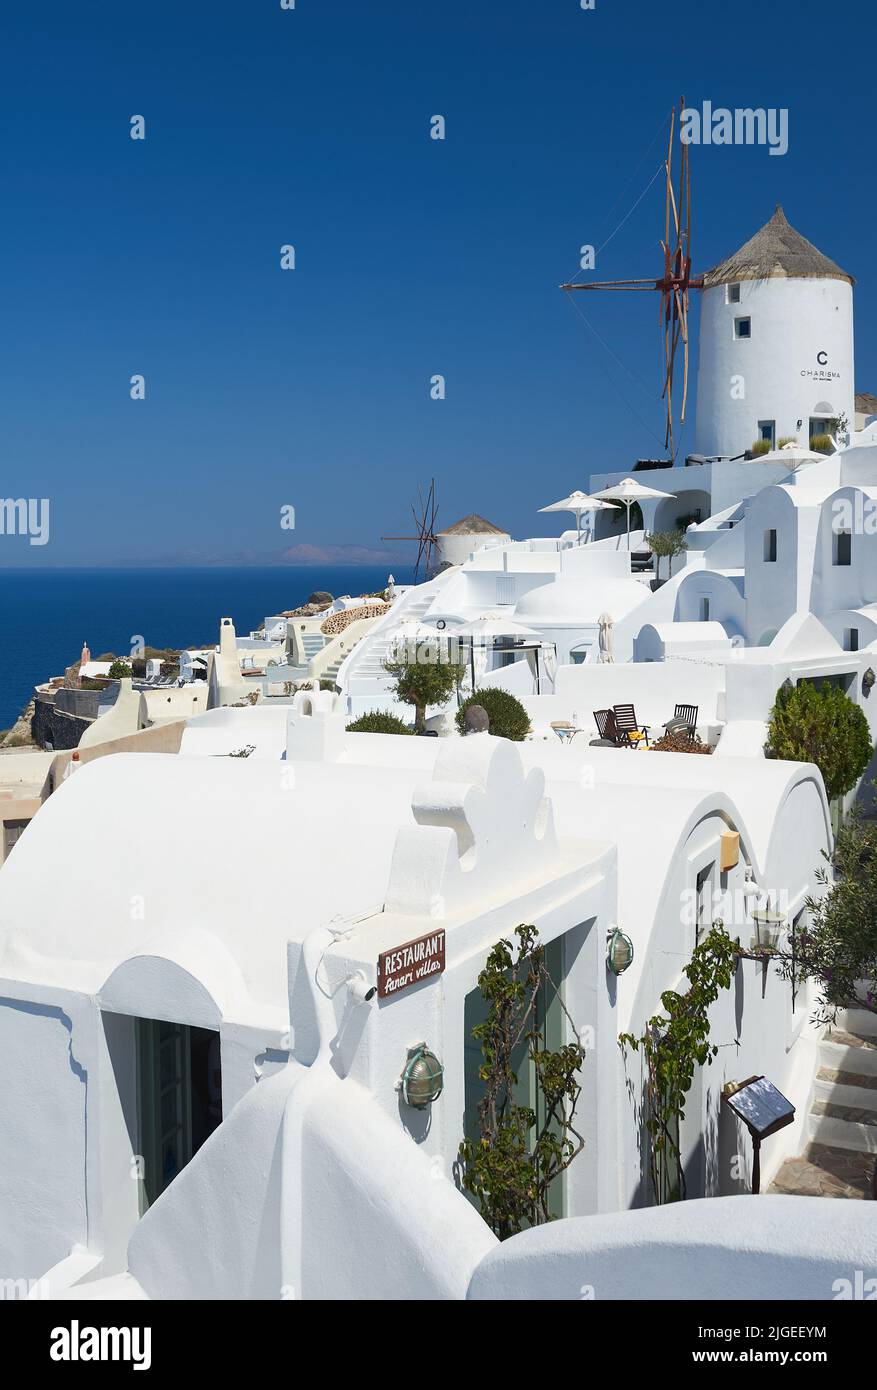 Oia, or Ia a picturesque village of white washed houses on the island of Santorini, part of the Cyclades Islands off mainland Greece Stock Photo